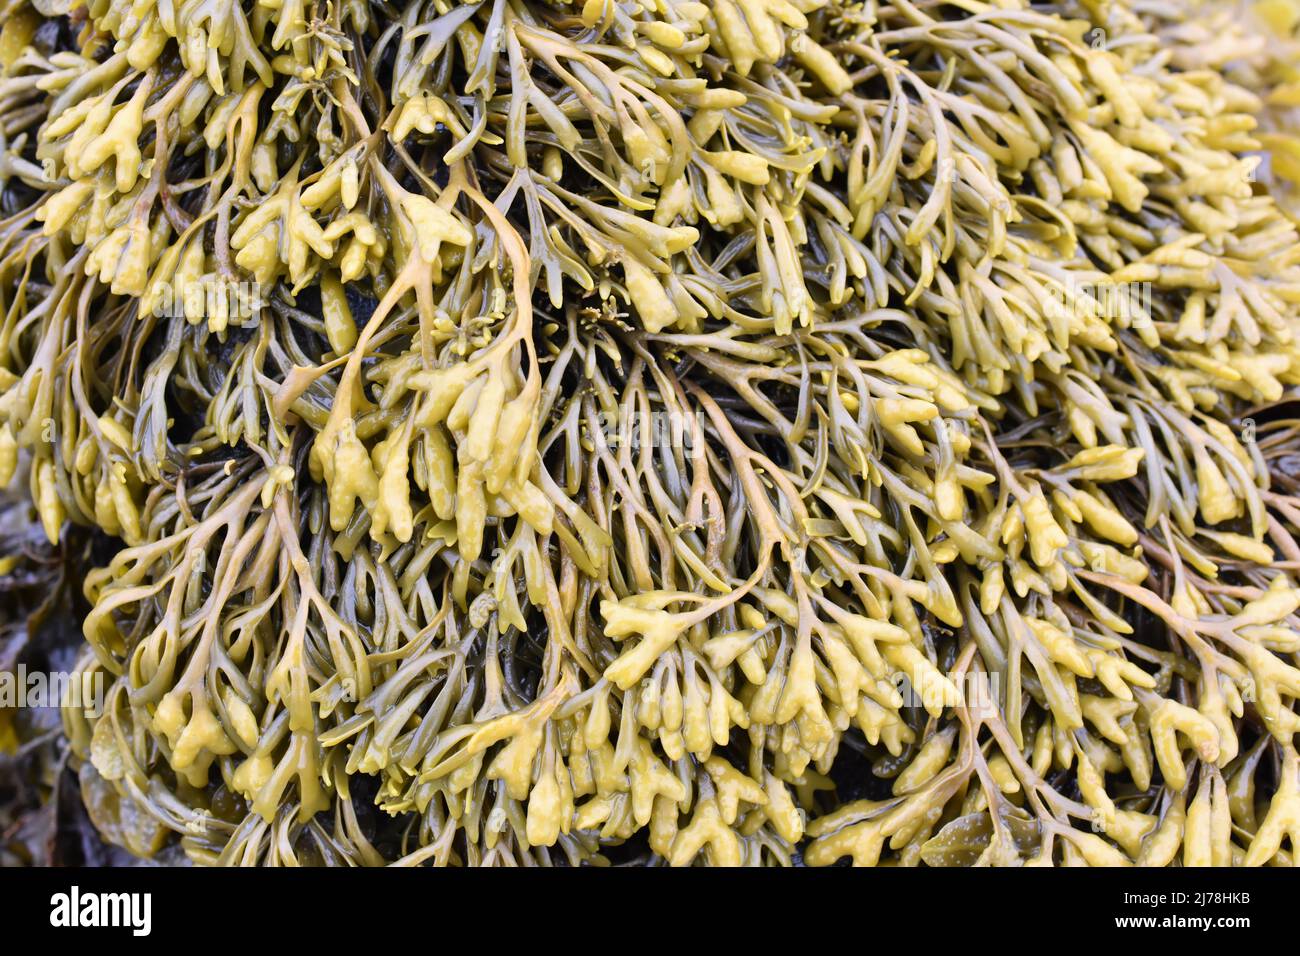 The brown algae seaweed Pelvetia canaliculata channelled wrack on a rock Stock Photo